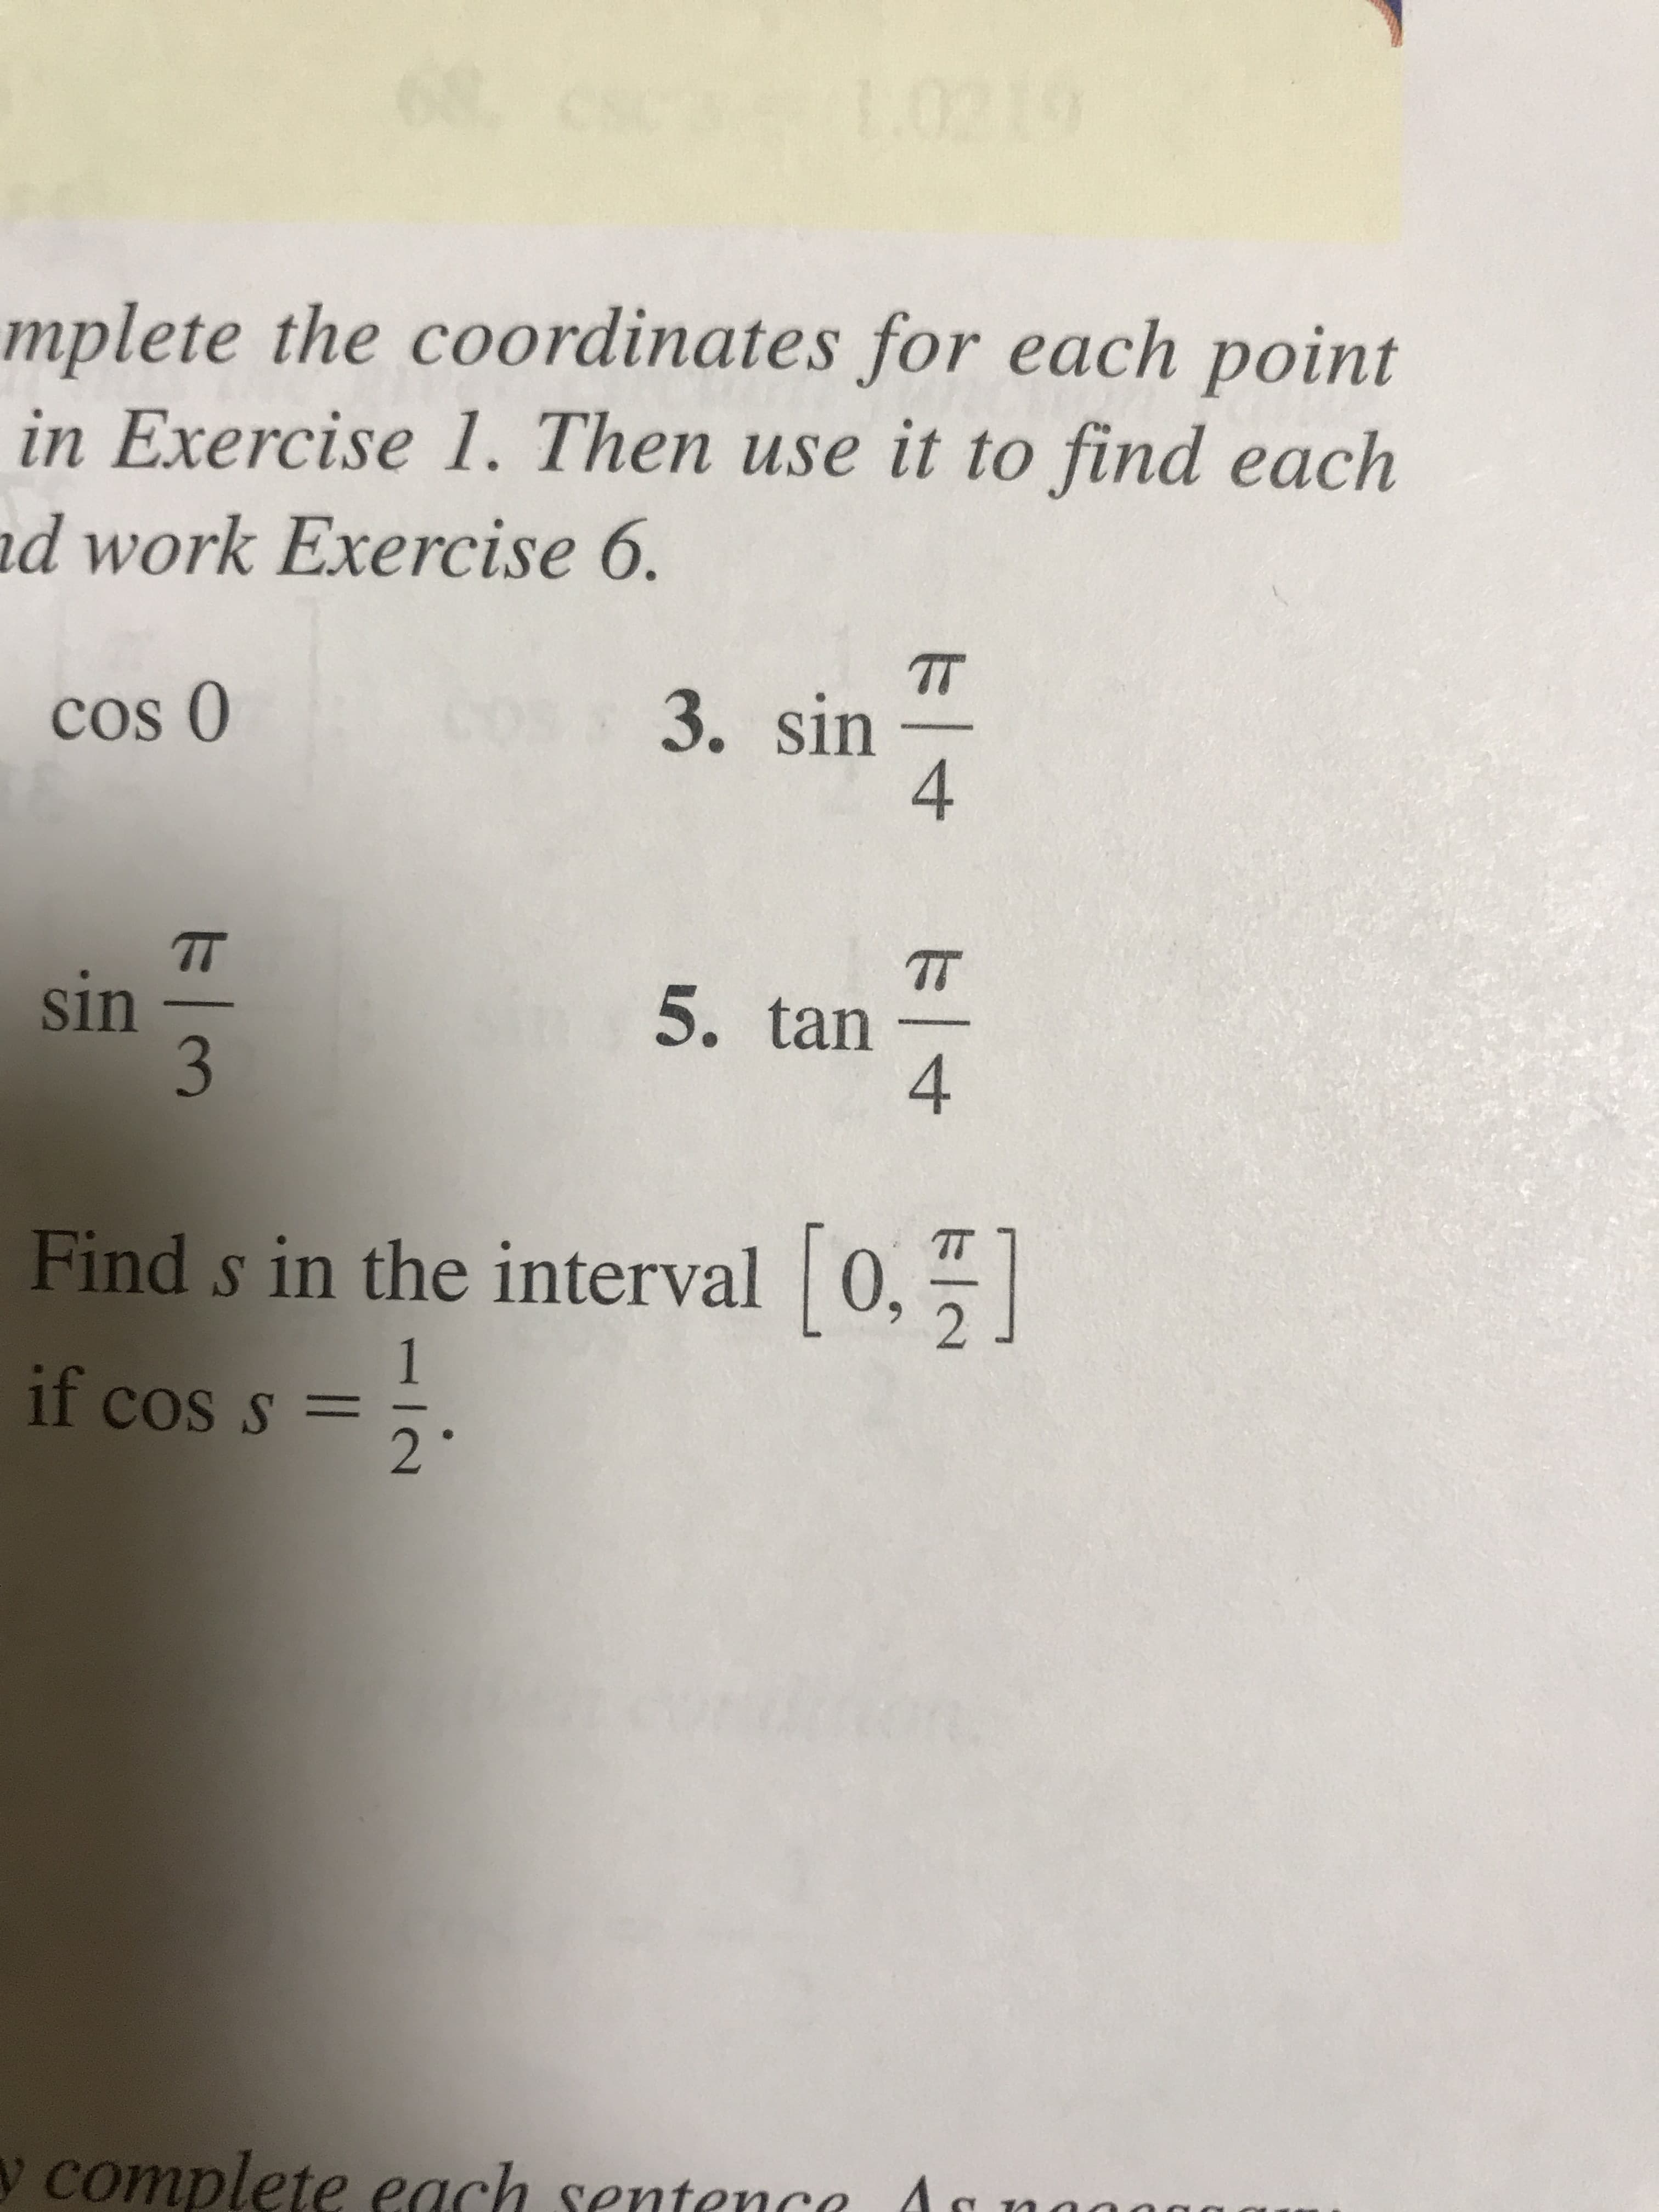 mplete the coordinates for each point
in Exercise 1. Then use it to find each
d work Exercise 6.
cos 0
3. sin
4
sin-
5. tan
Find s in the interval [o.
11 cos s =-
2
